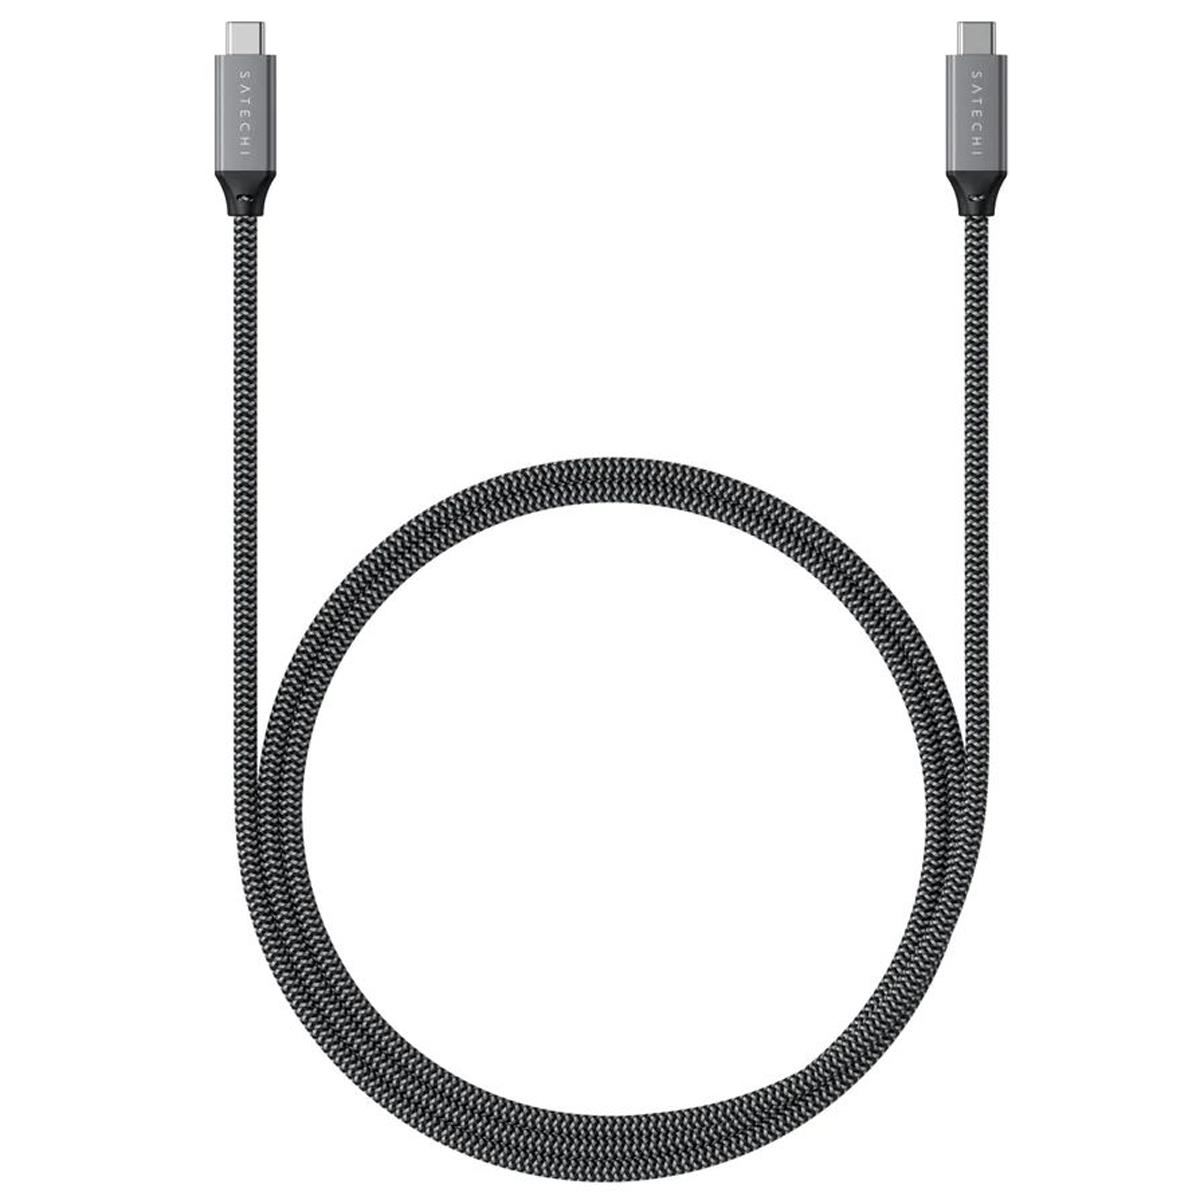 Image of Satechi 2.6' 40Gbps USB 4.0 Type-C to Type-C Cable